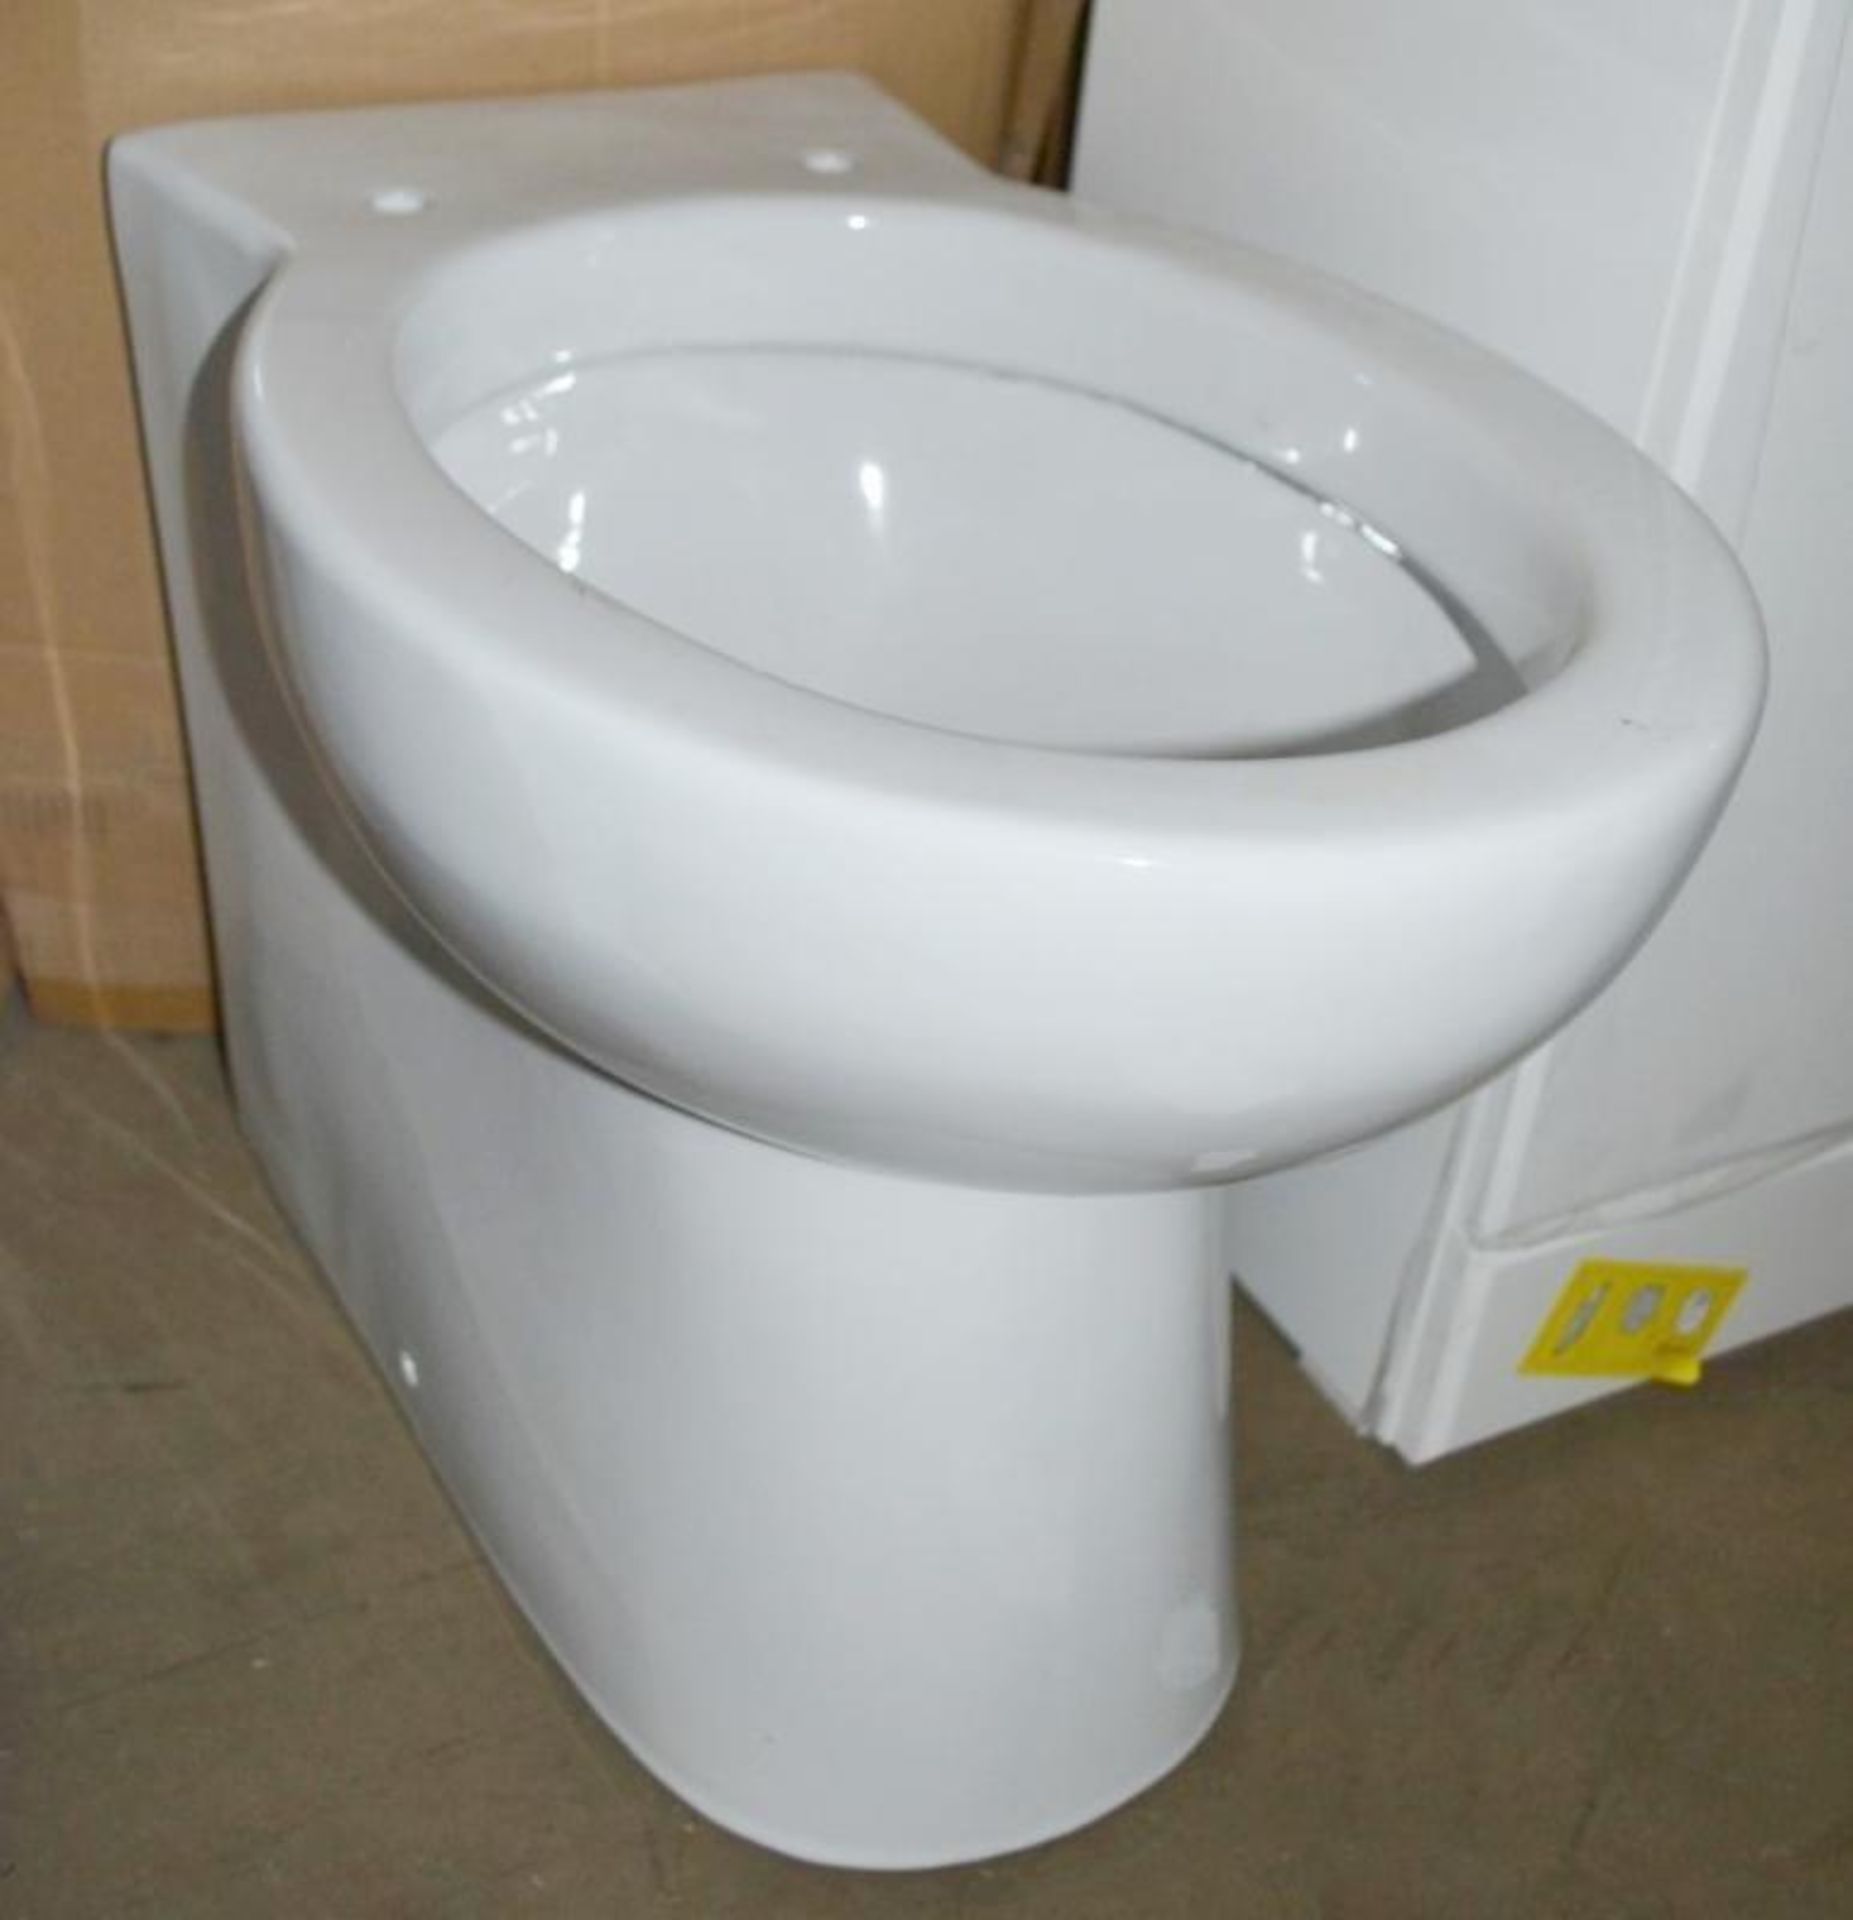 1 x Clarity Back To The Wall Toilet Pan - New / Unused Stock - CL269 - Ref MT765 - Location: Bolton